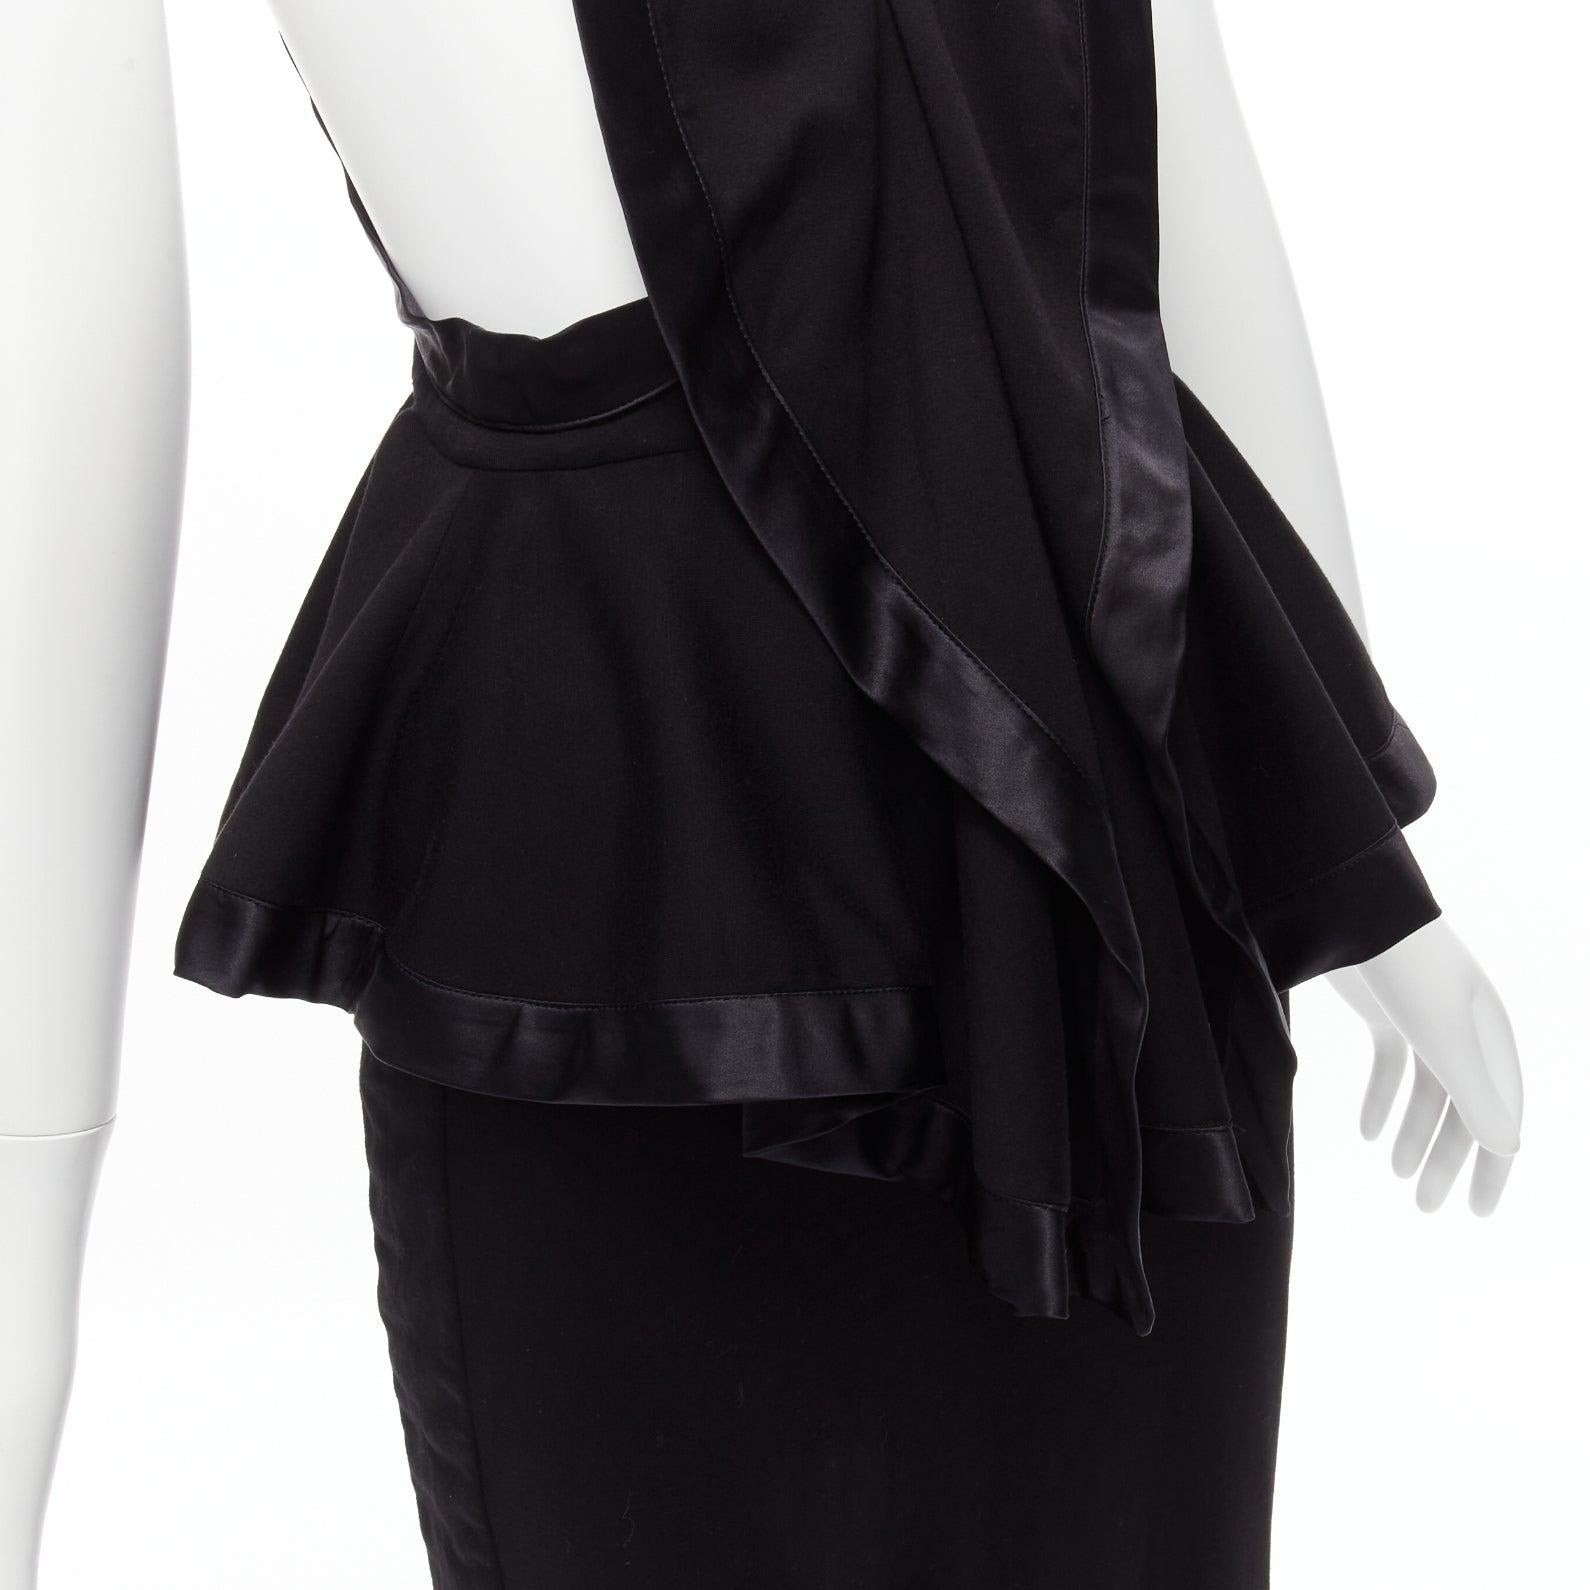 GIVENCHY RICCARDO TISCI Runway black satin jersey ruffle peplum racer cut out dress
Reference: VACN/A00044
Brand: Givenchy
Designer: Riccardo Tisci
Collection: Runway
Material: Satin, Jersey
Color: Black
Pattern: Solid
Closure: Zip
Lining: Black